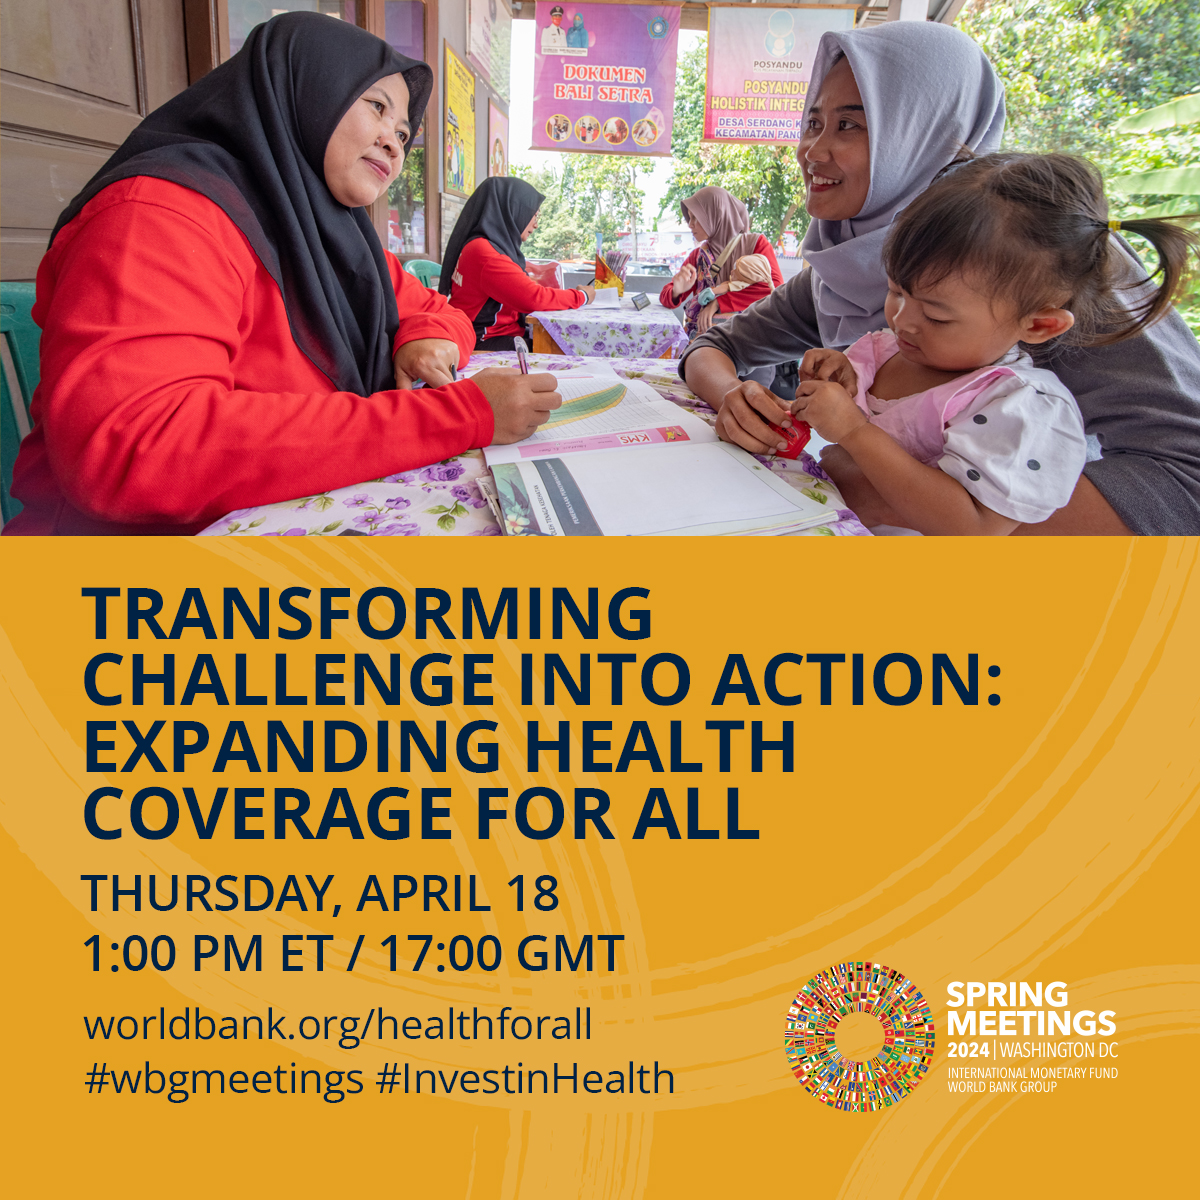 More than half of the world's population lacks access to essential health services. Join our #WBGMeetings event on April 18th at 1 pm ET to discuss how we can accelerate progress towards Universal Health Coverage by 2030. wrld.bg/CoG850R6qu7